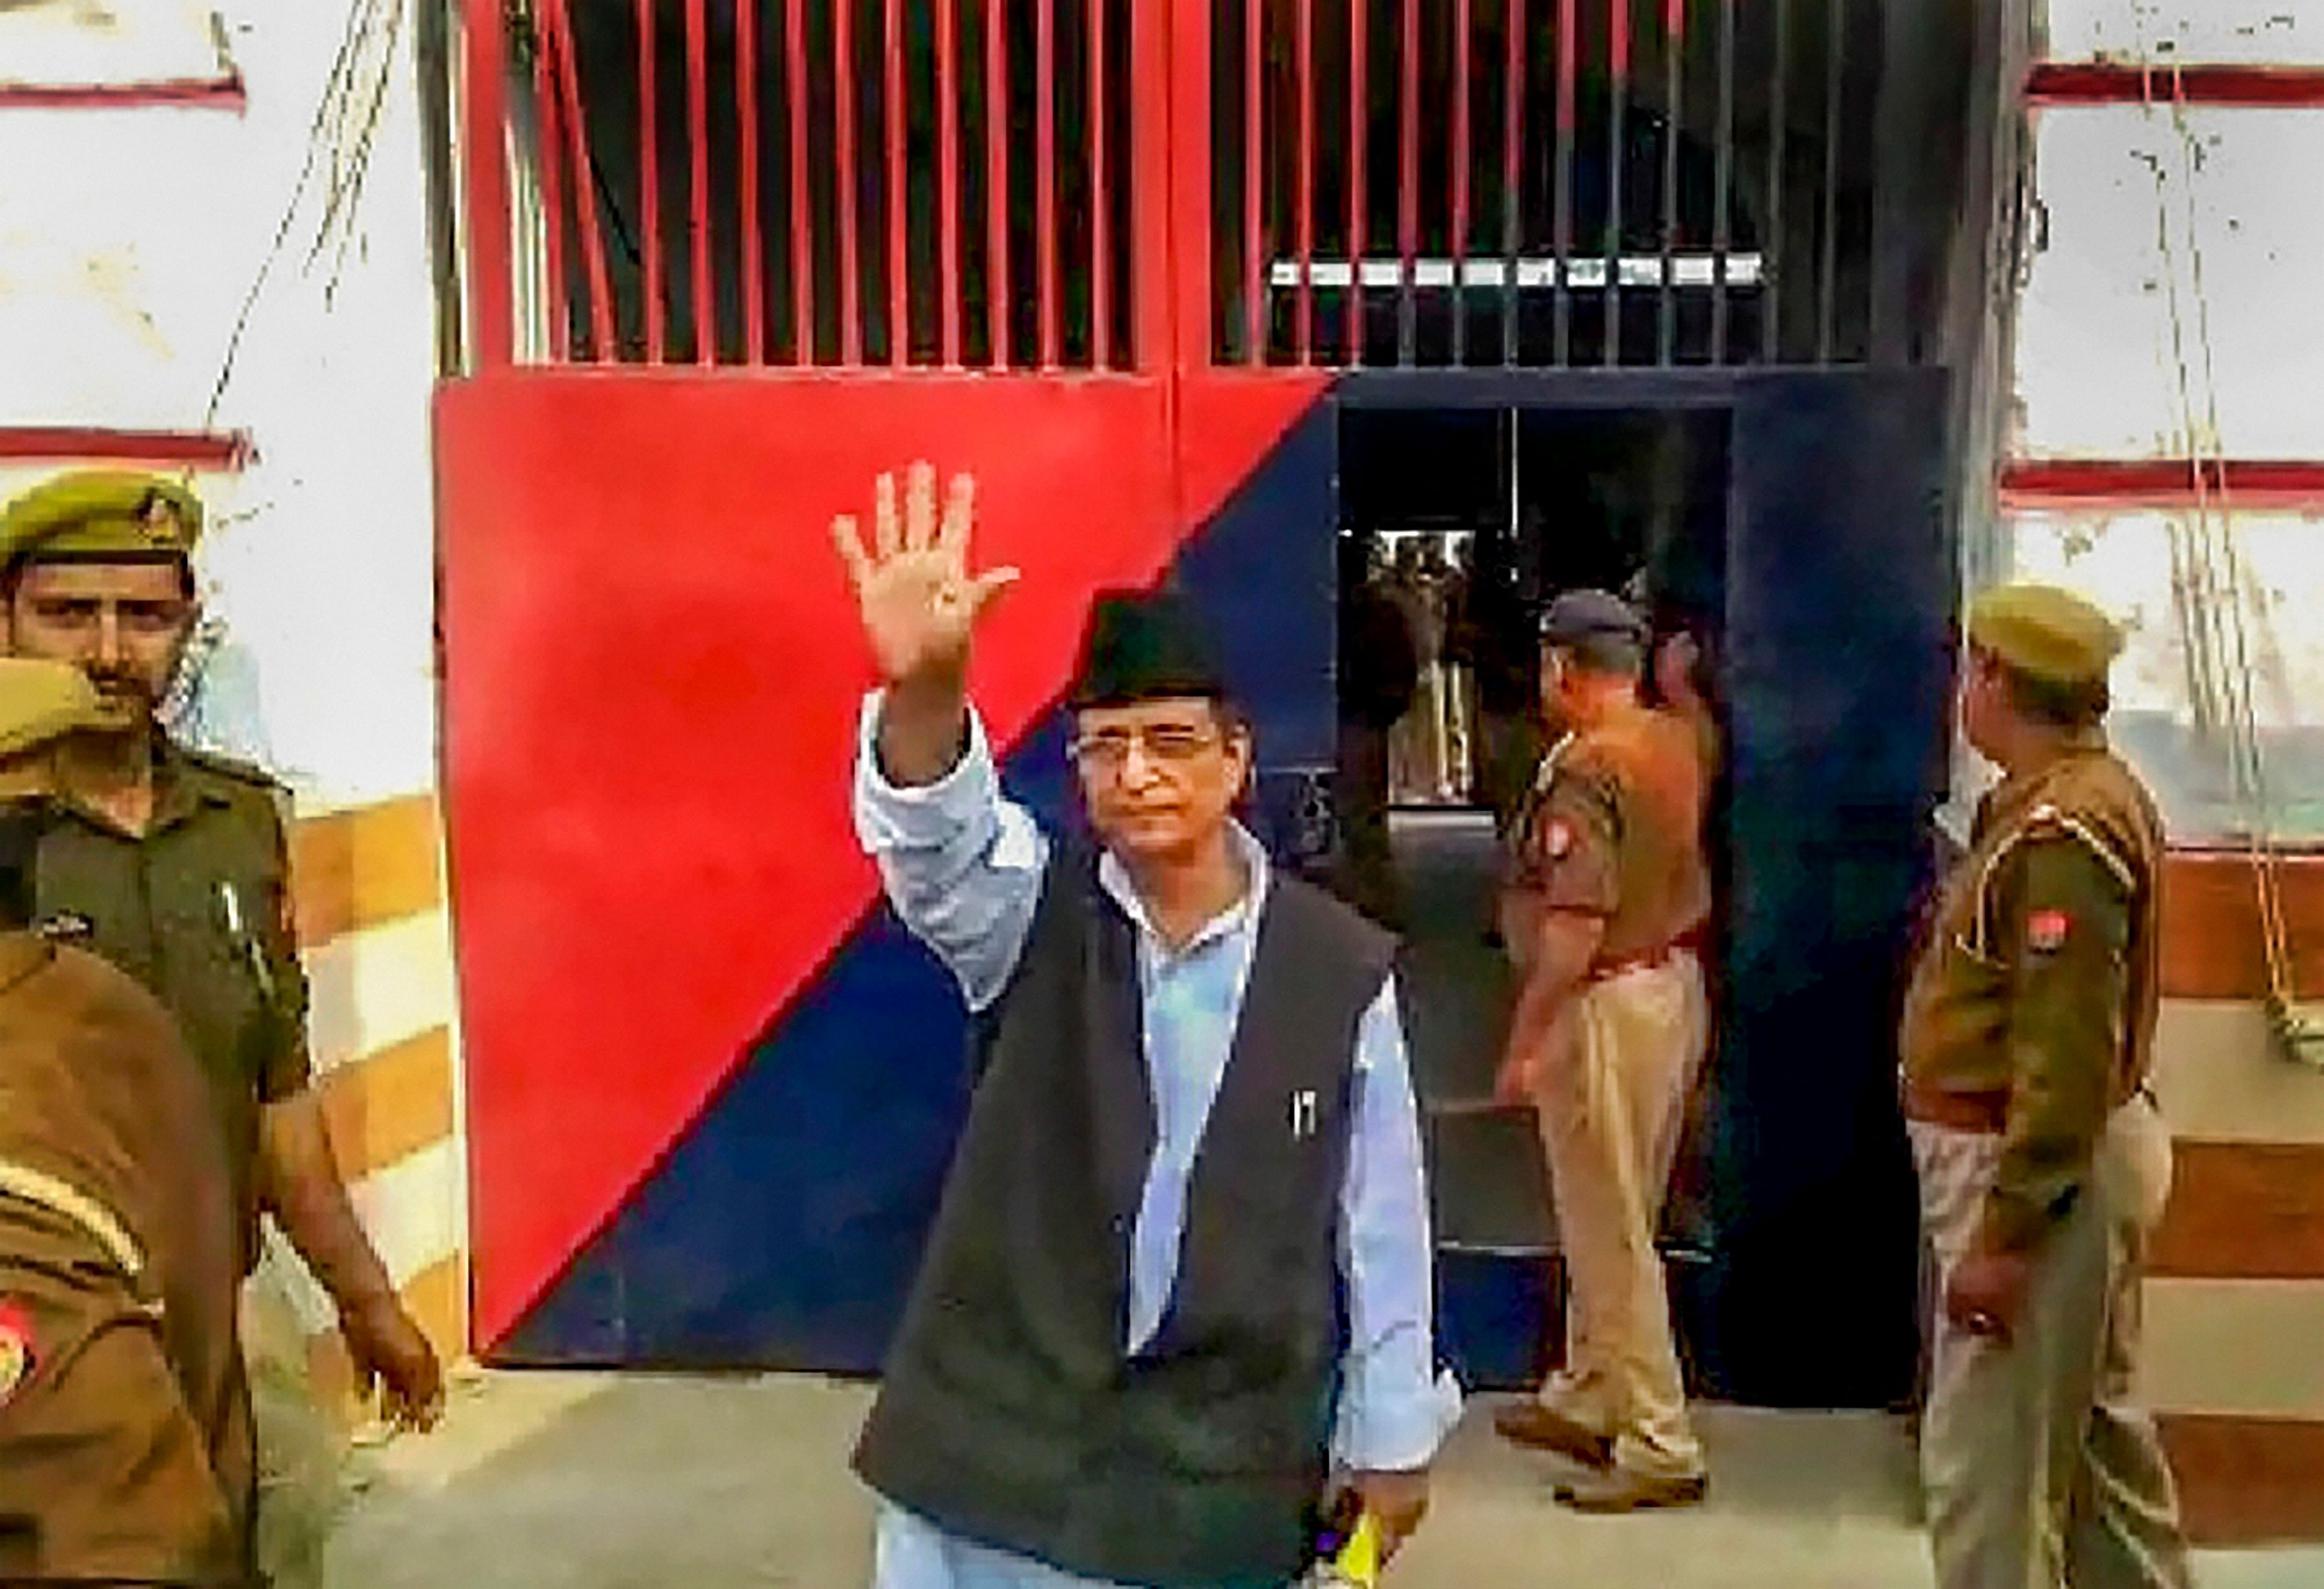 Samajwadi Party MP Azam Khan waves before being sent to judicial custody for allegedly faking Abdullah's birth certificate, in Rampur, Wednesday, Feb. 26, 2020. (Credit: PTI Photo)